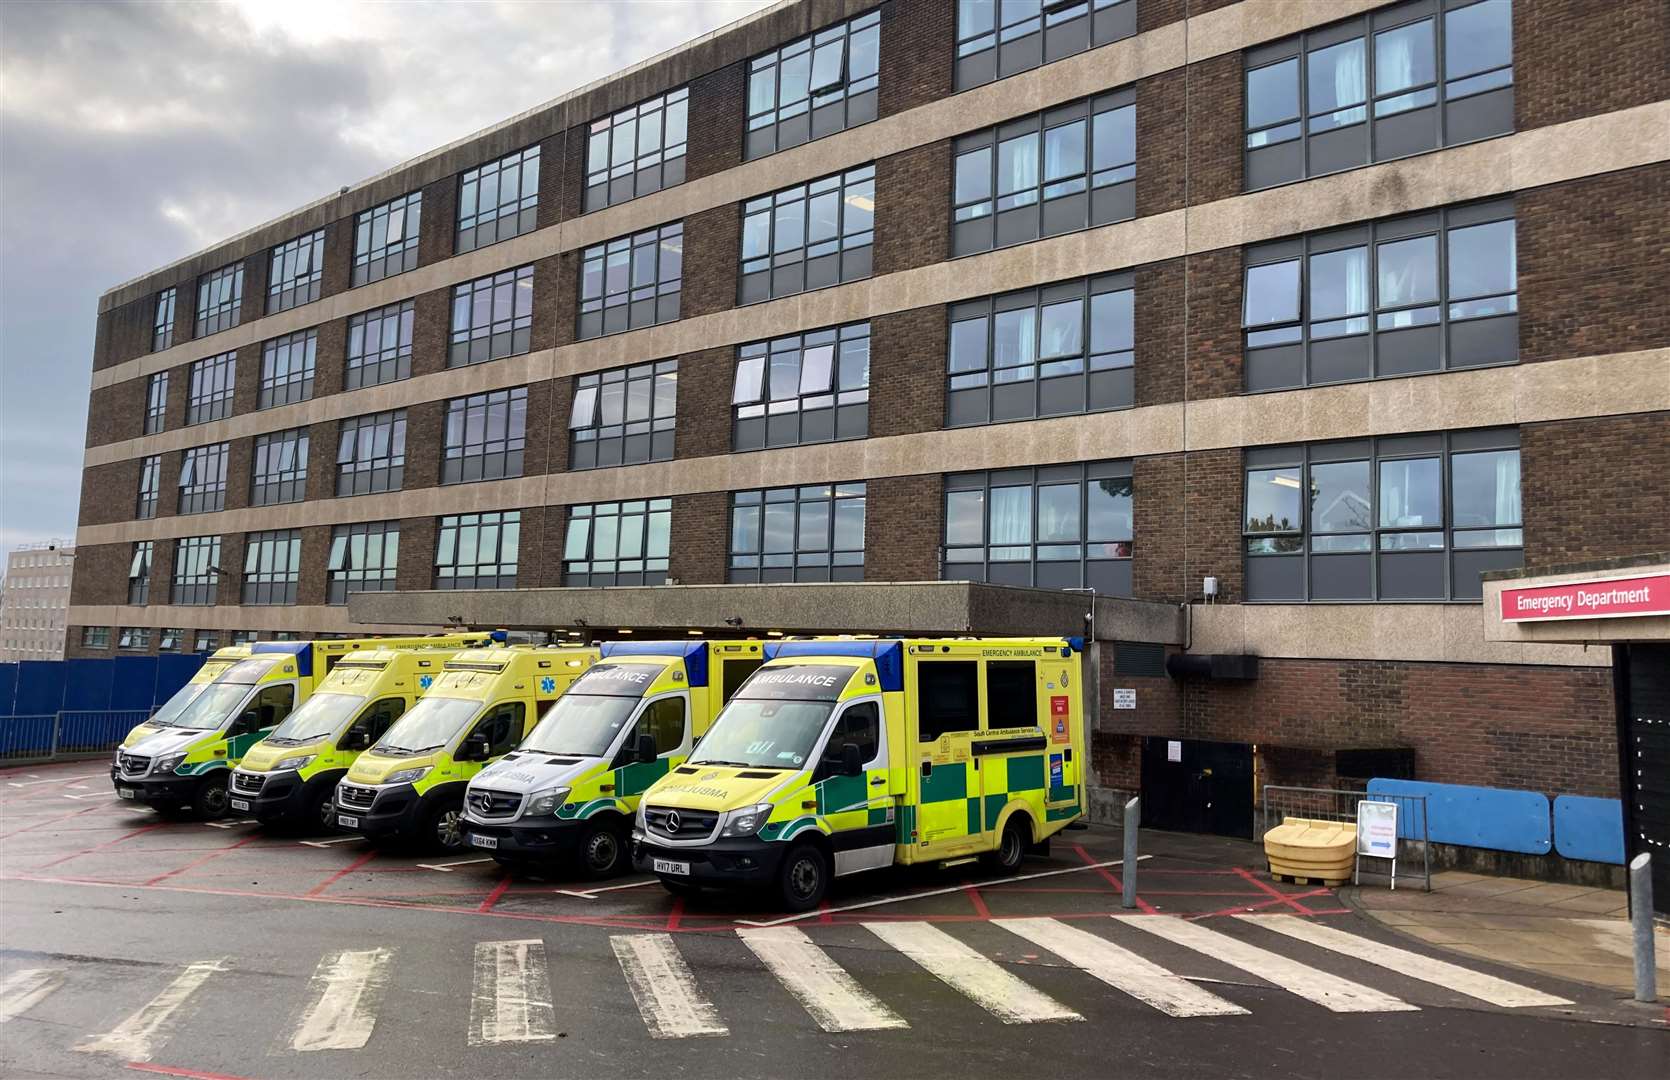 Ambulances parked up outside the accident and emergency department at the Queen Alexandra Hospital in Cosham, Portsmouth (Andrew Matthews/PA)